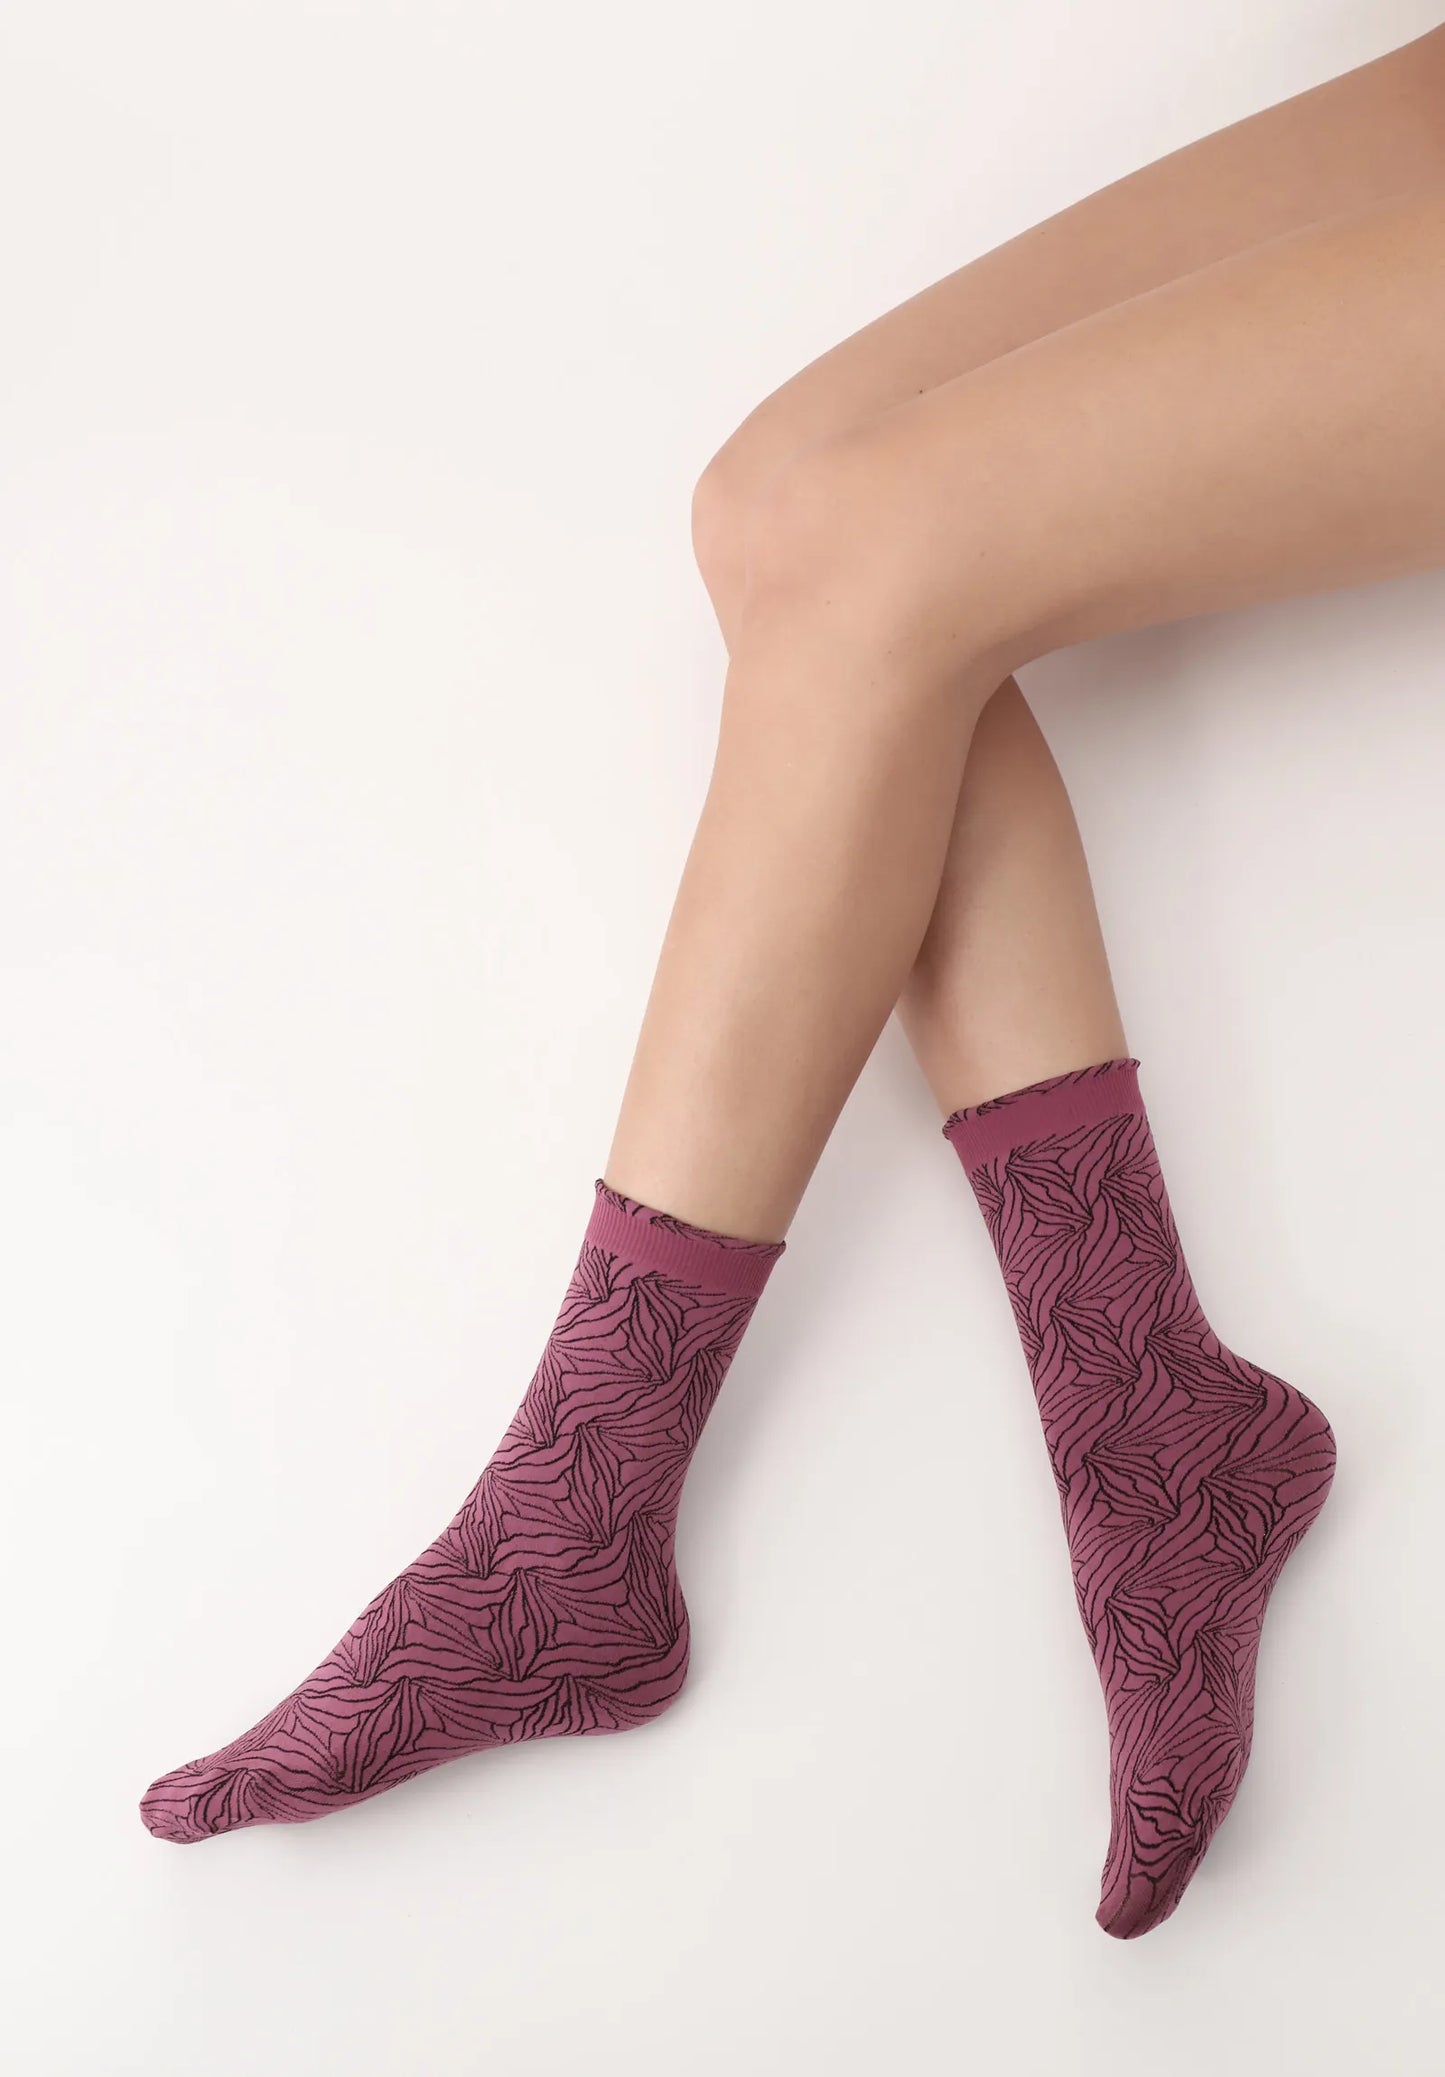 OorblÌ_ I Love Italy Milano Sock - Dusty rose pink opaque fashion ankle socks with a black wavy linear leaf style pattern and elasticated cuff.